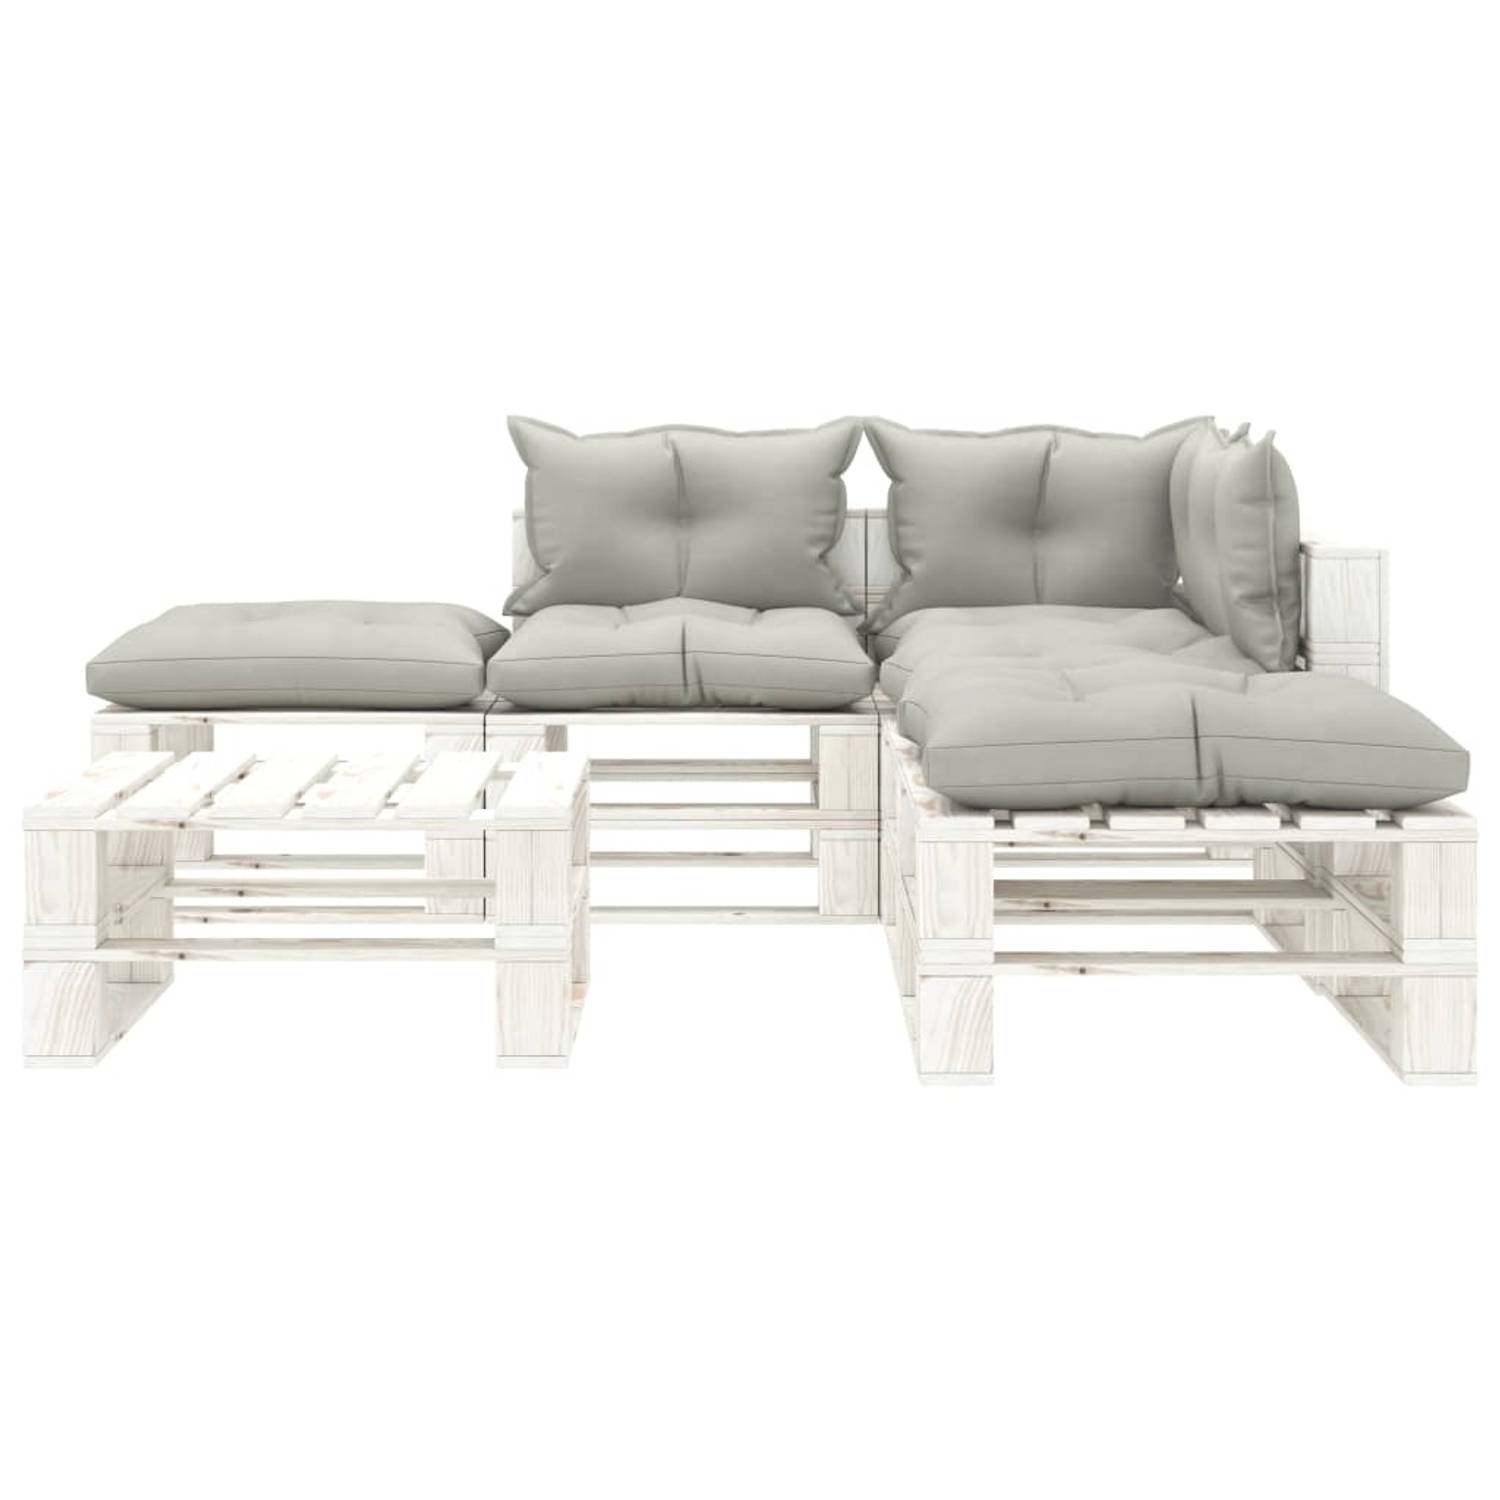 The Living Store Pallet Loungeset - Grenenhout - 70 x 67.5 x 60.8 cm - Taupe - wit